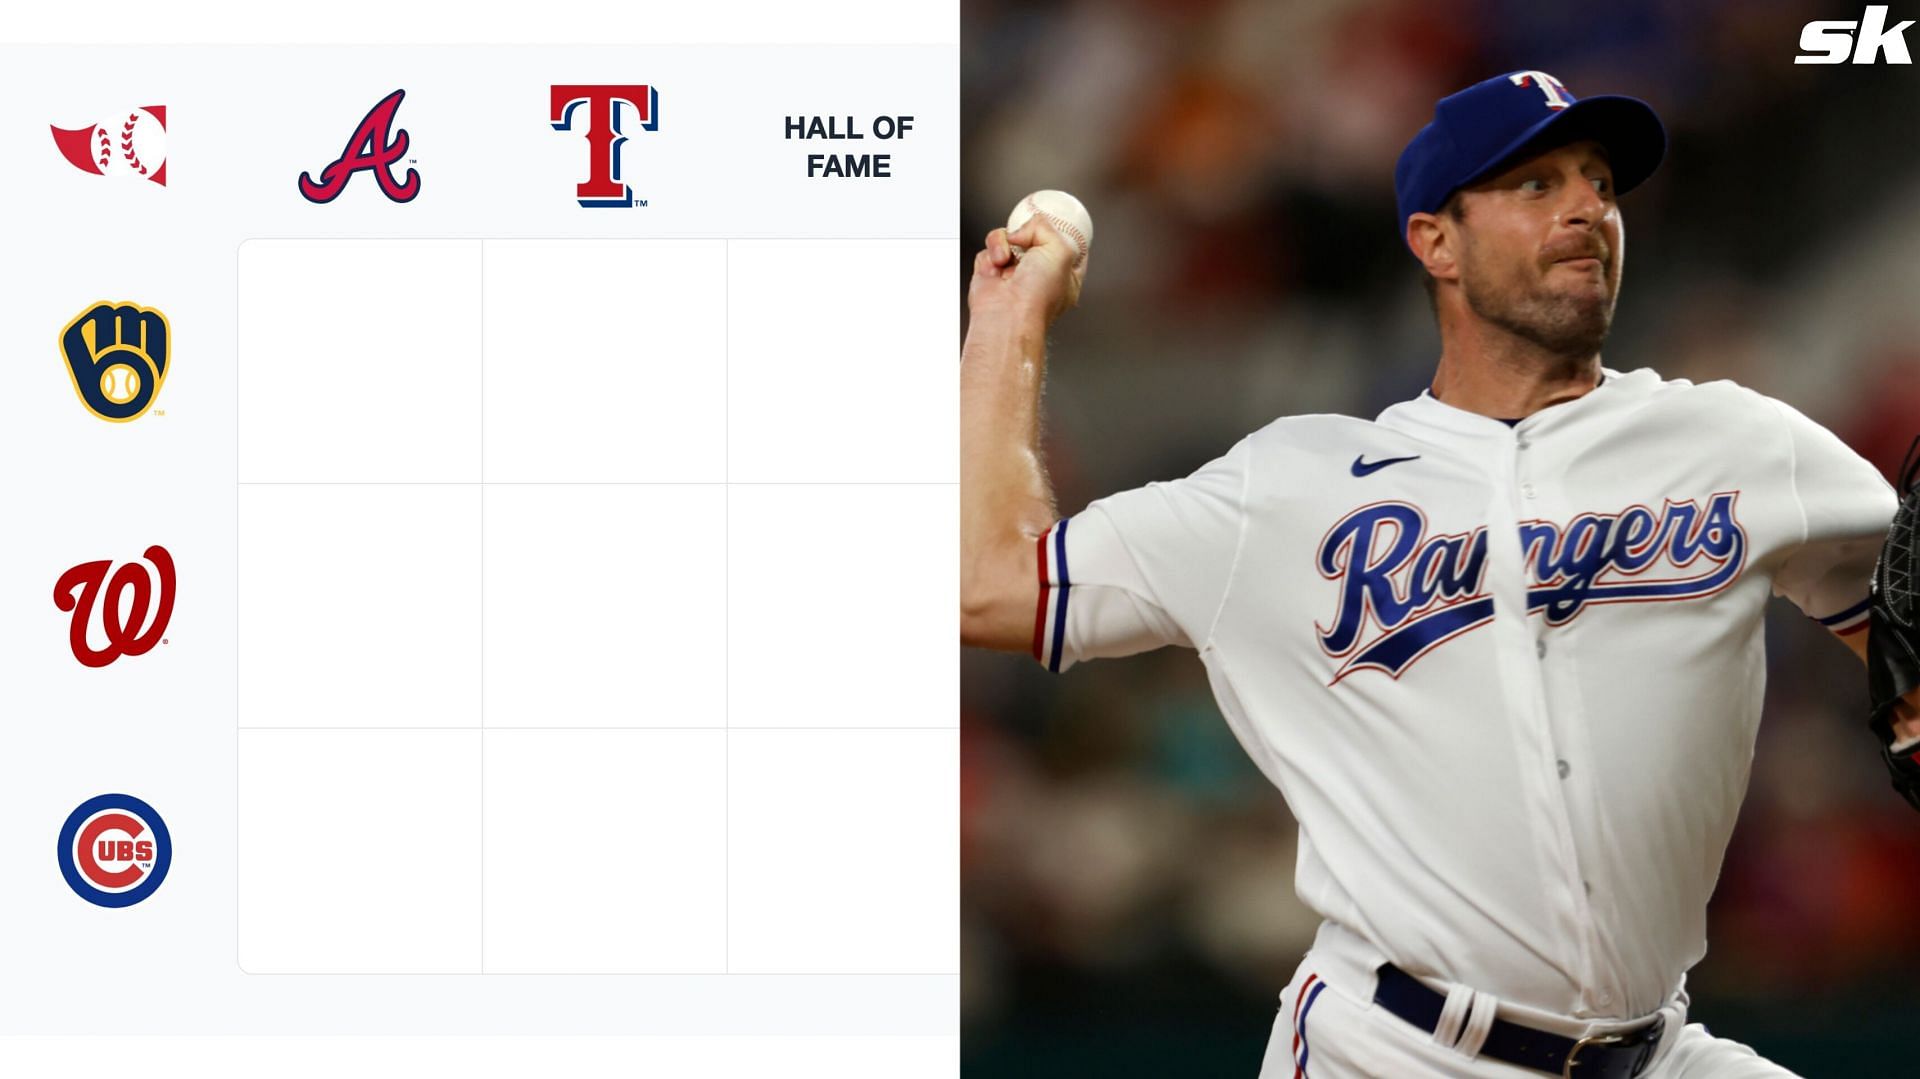 MLB Immaculate Grid Answers August 25 Nationals players to have also played for the Rangers